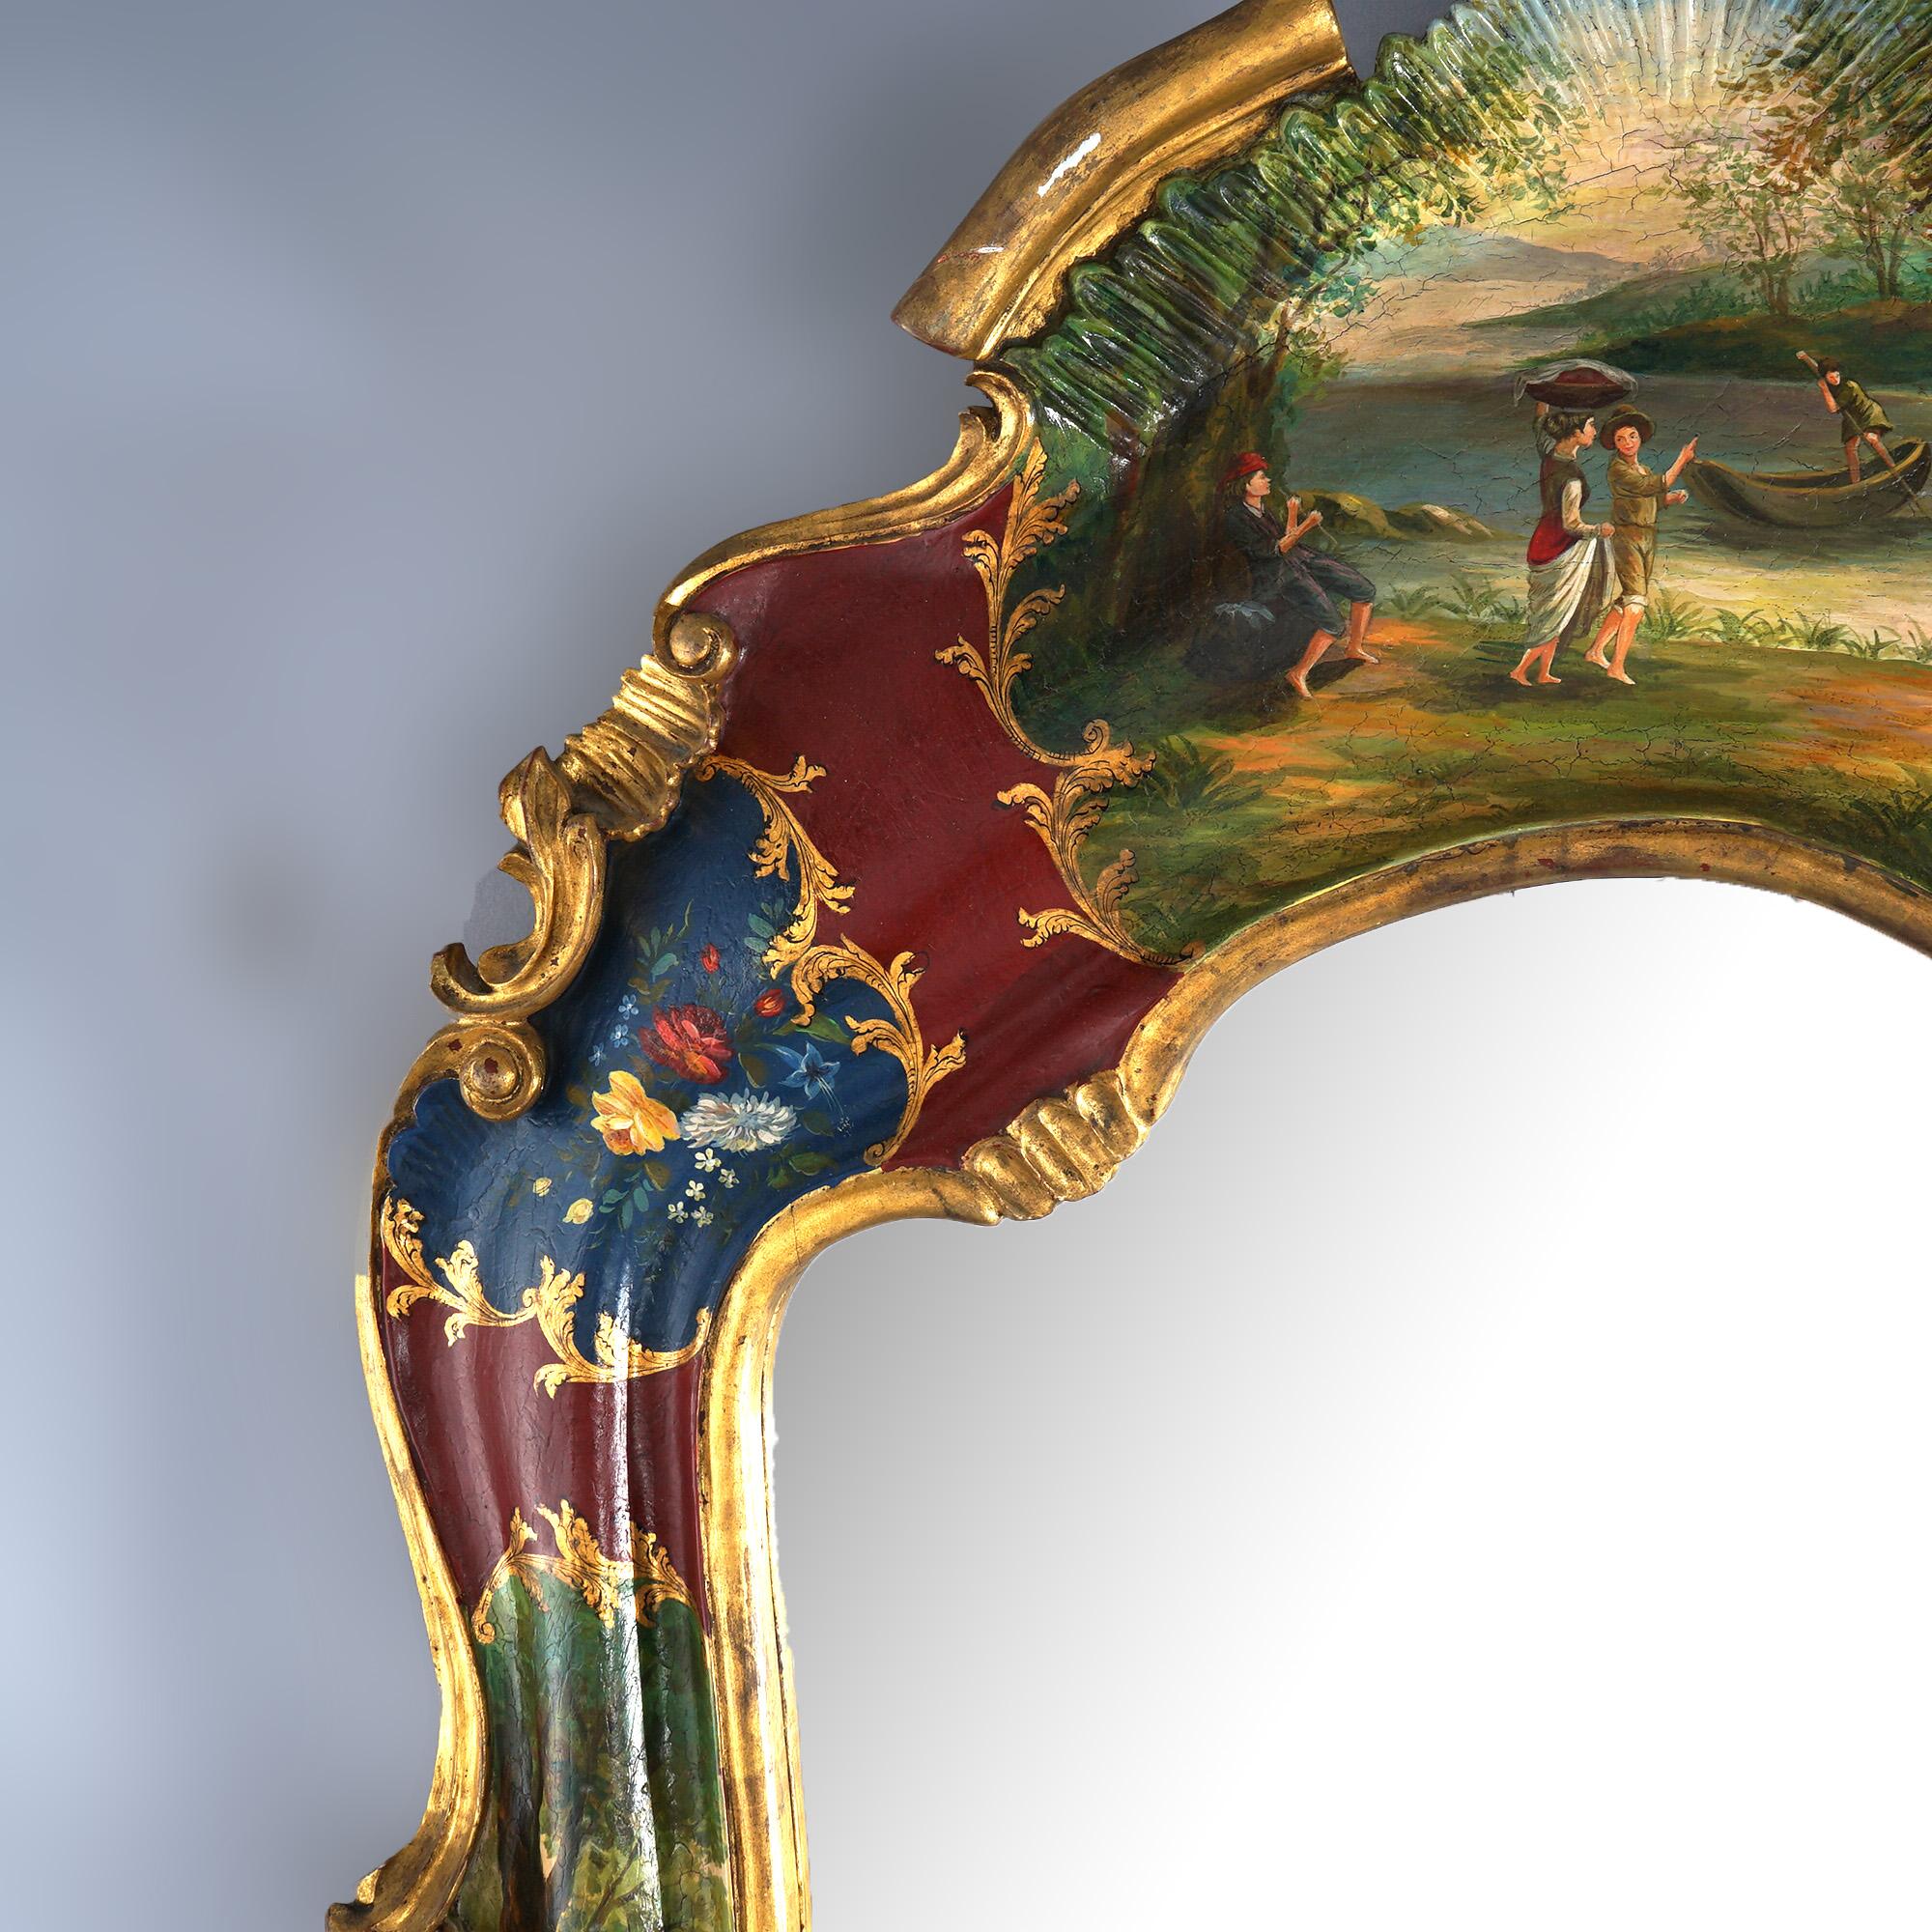 ***Ask About Reduced In-House Delivery Rates - Reliable Professional Service & Fully Insured***
Antique Italian Rococo Style Venetian Decorated Shaped Wall Mirror with Carved Crest over Landscape Genre Scenes, Floral Elements and Heavily Gilt